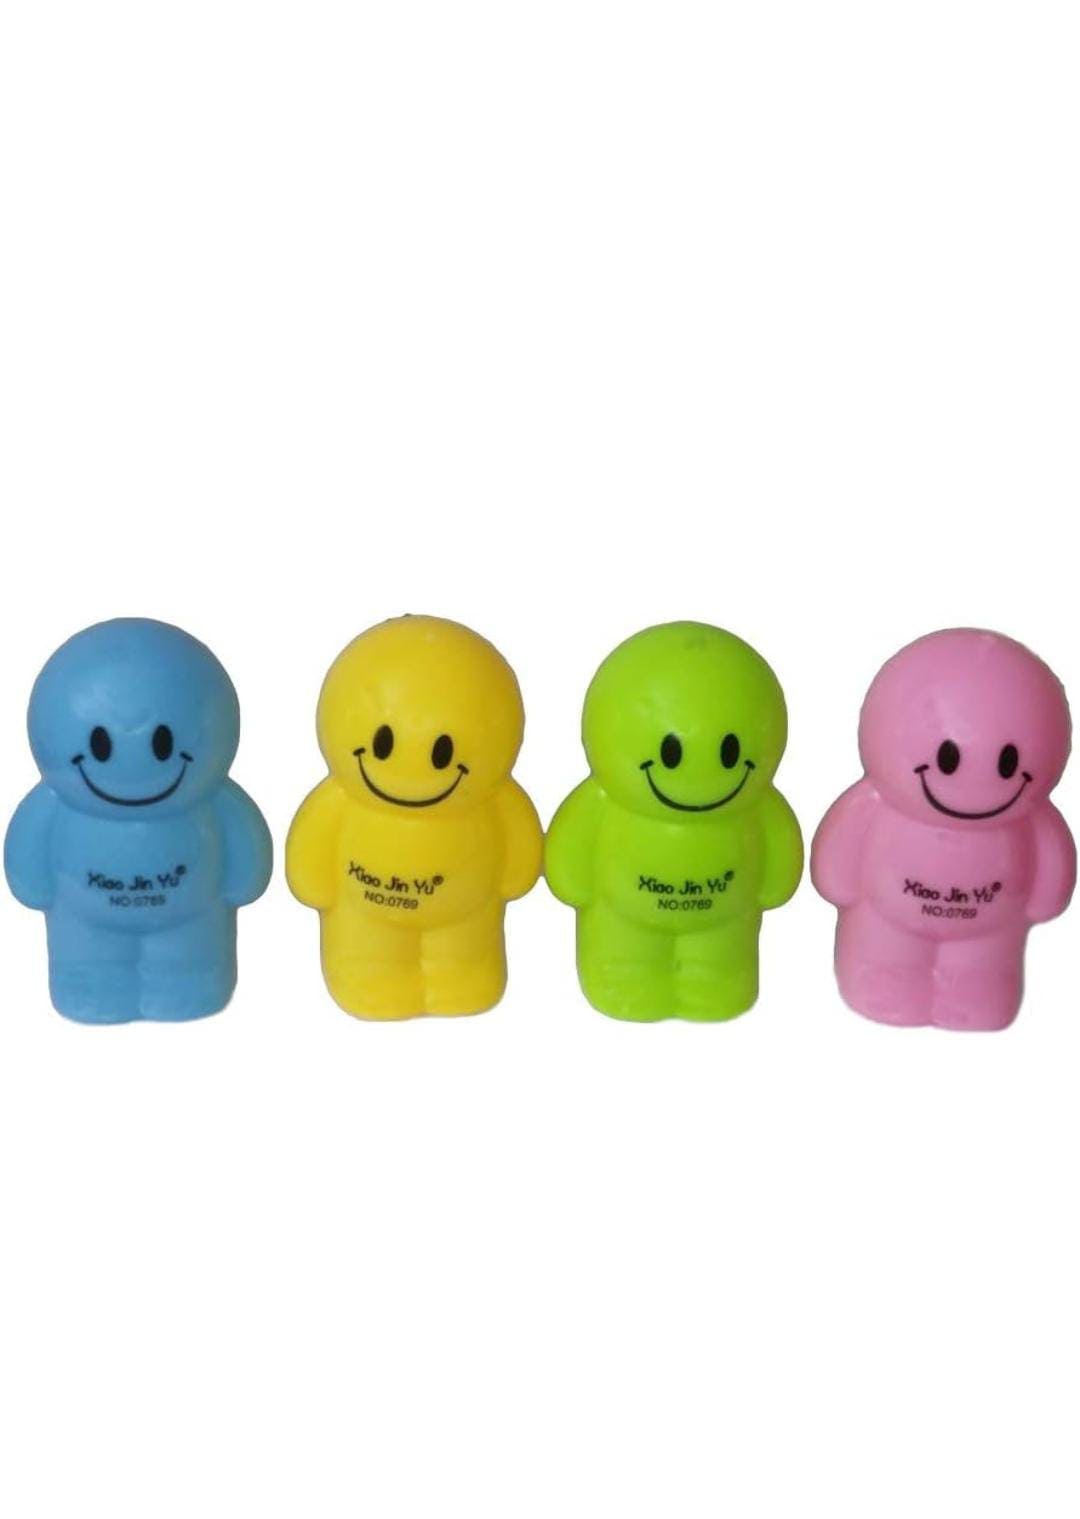 Sun international Cute Imported Smiley Look Double Blade Pencil Sharpener - School Stationery for Kids